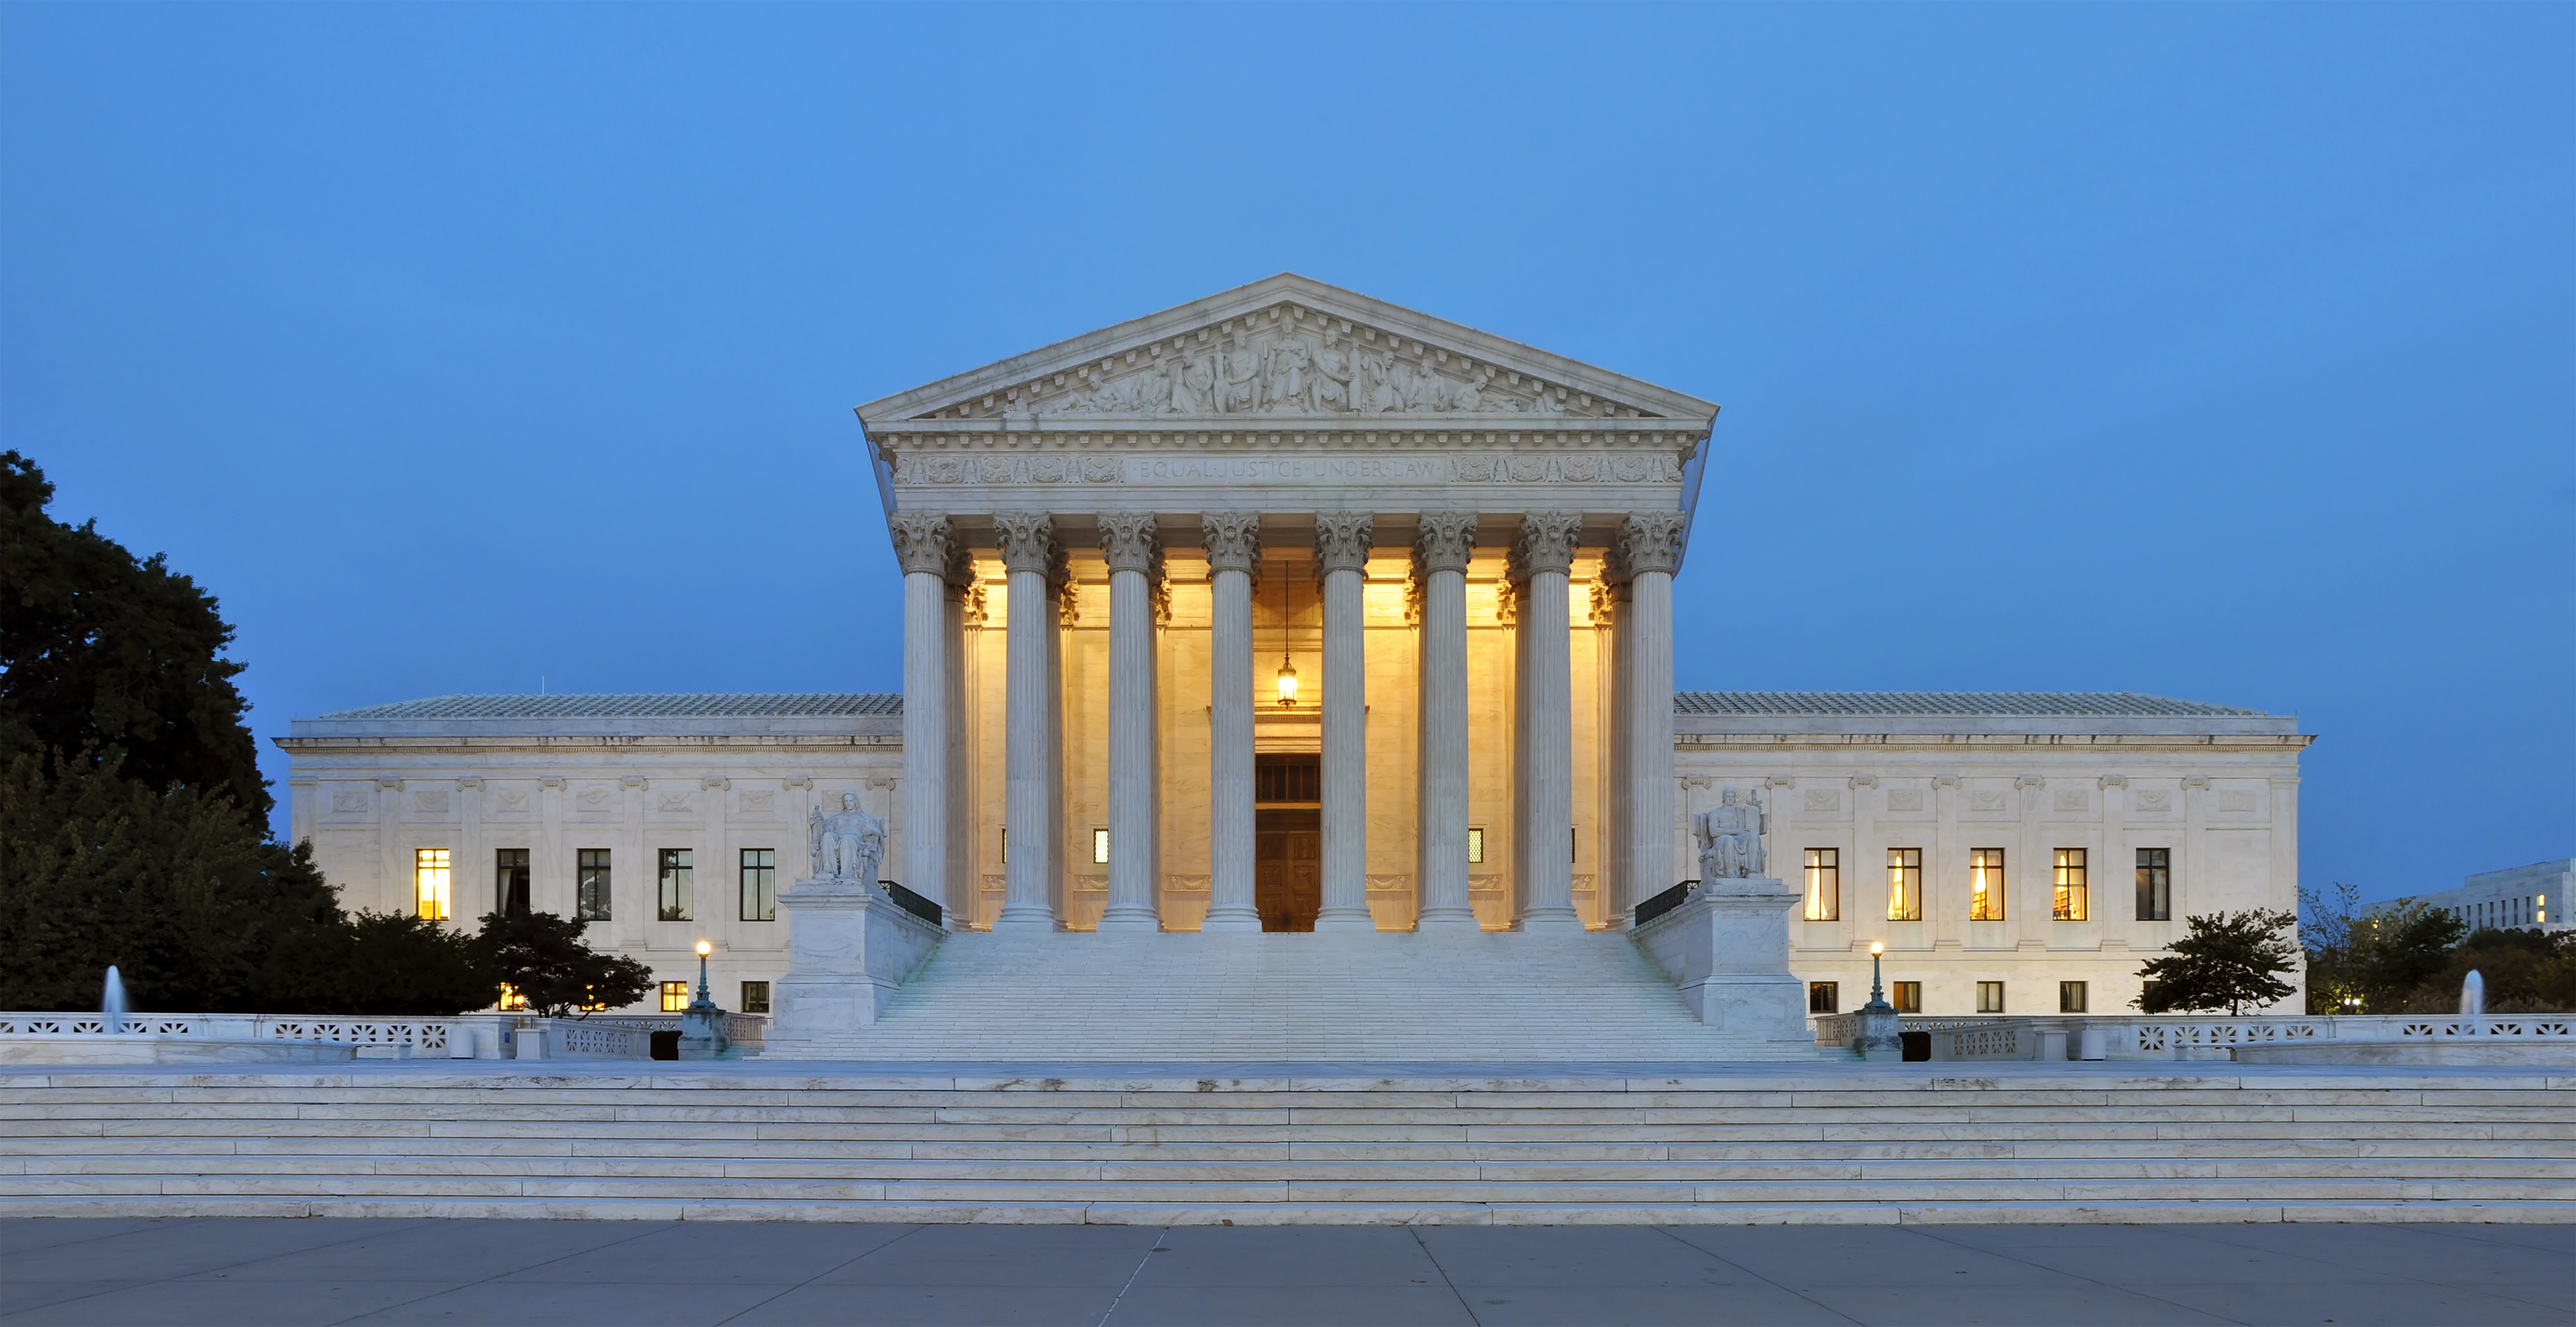 Panoramic image of US Supreme Court building exterior